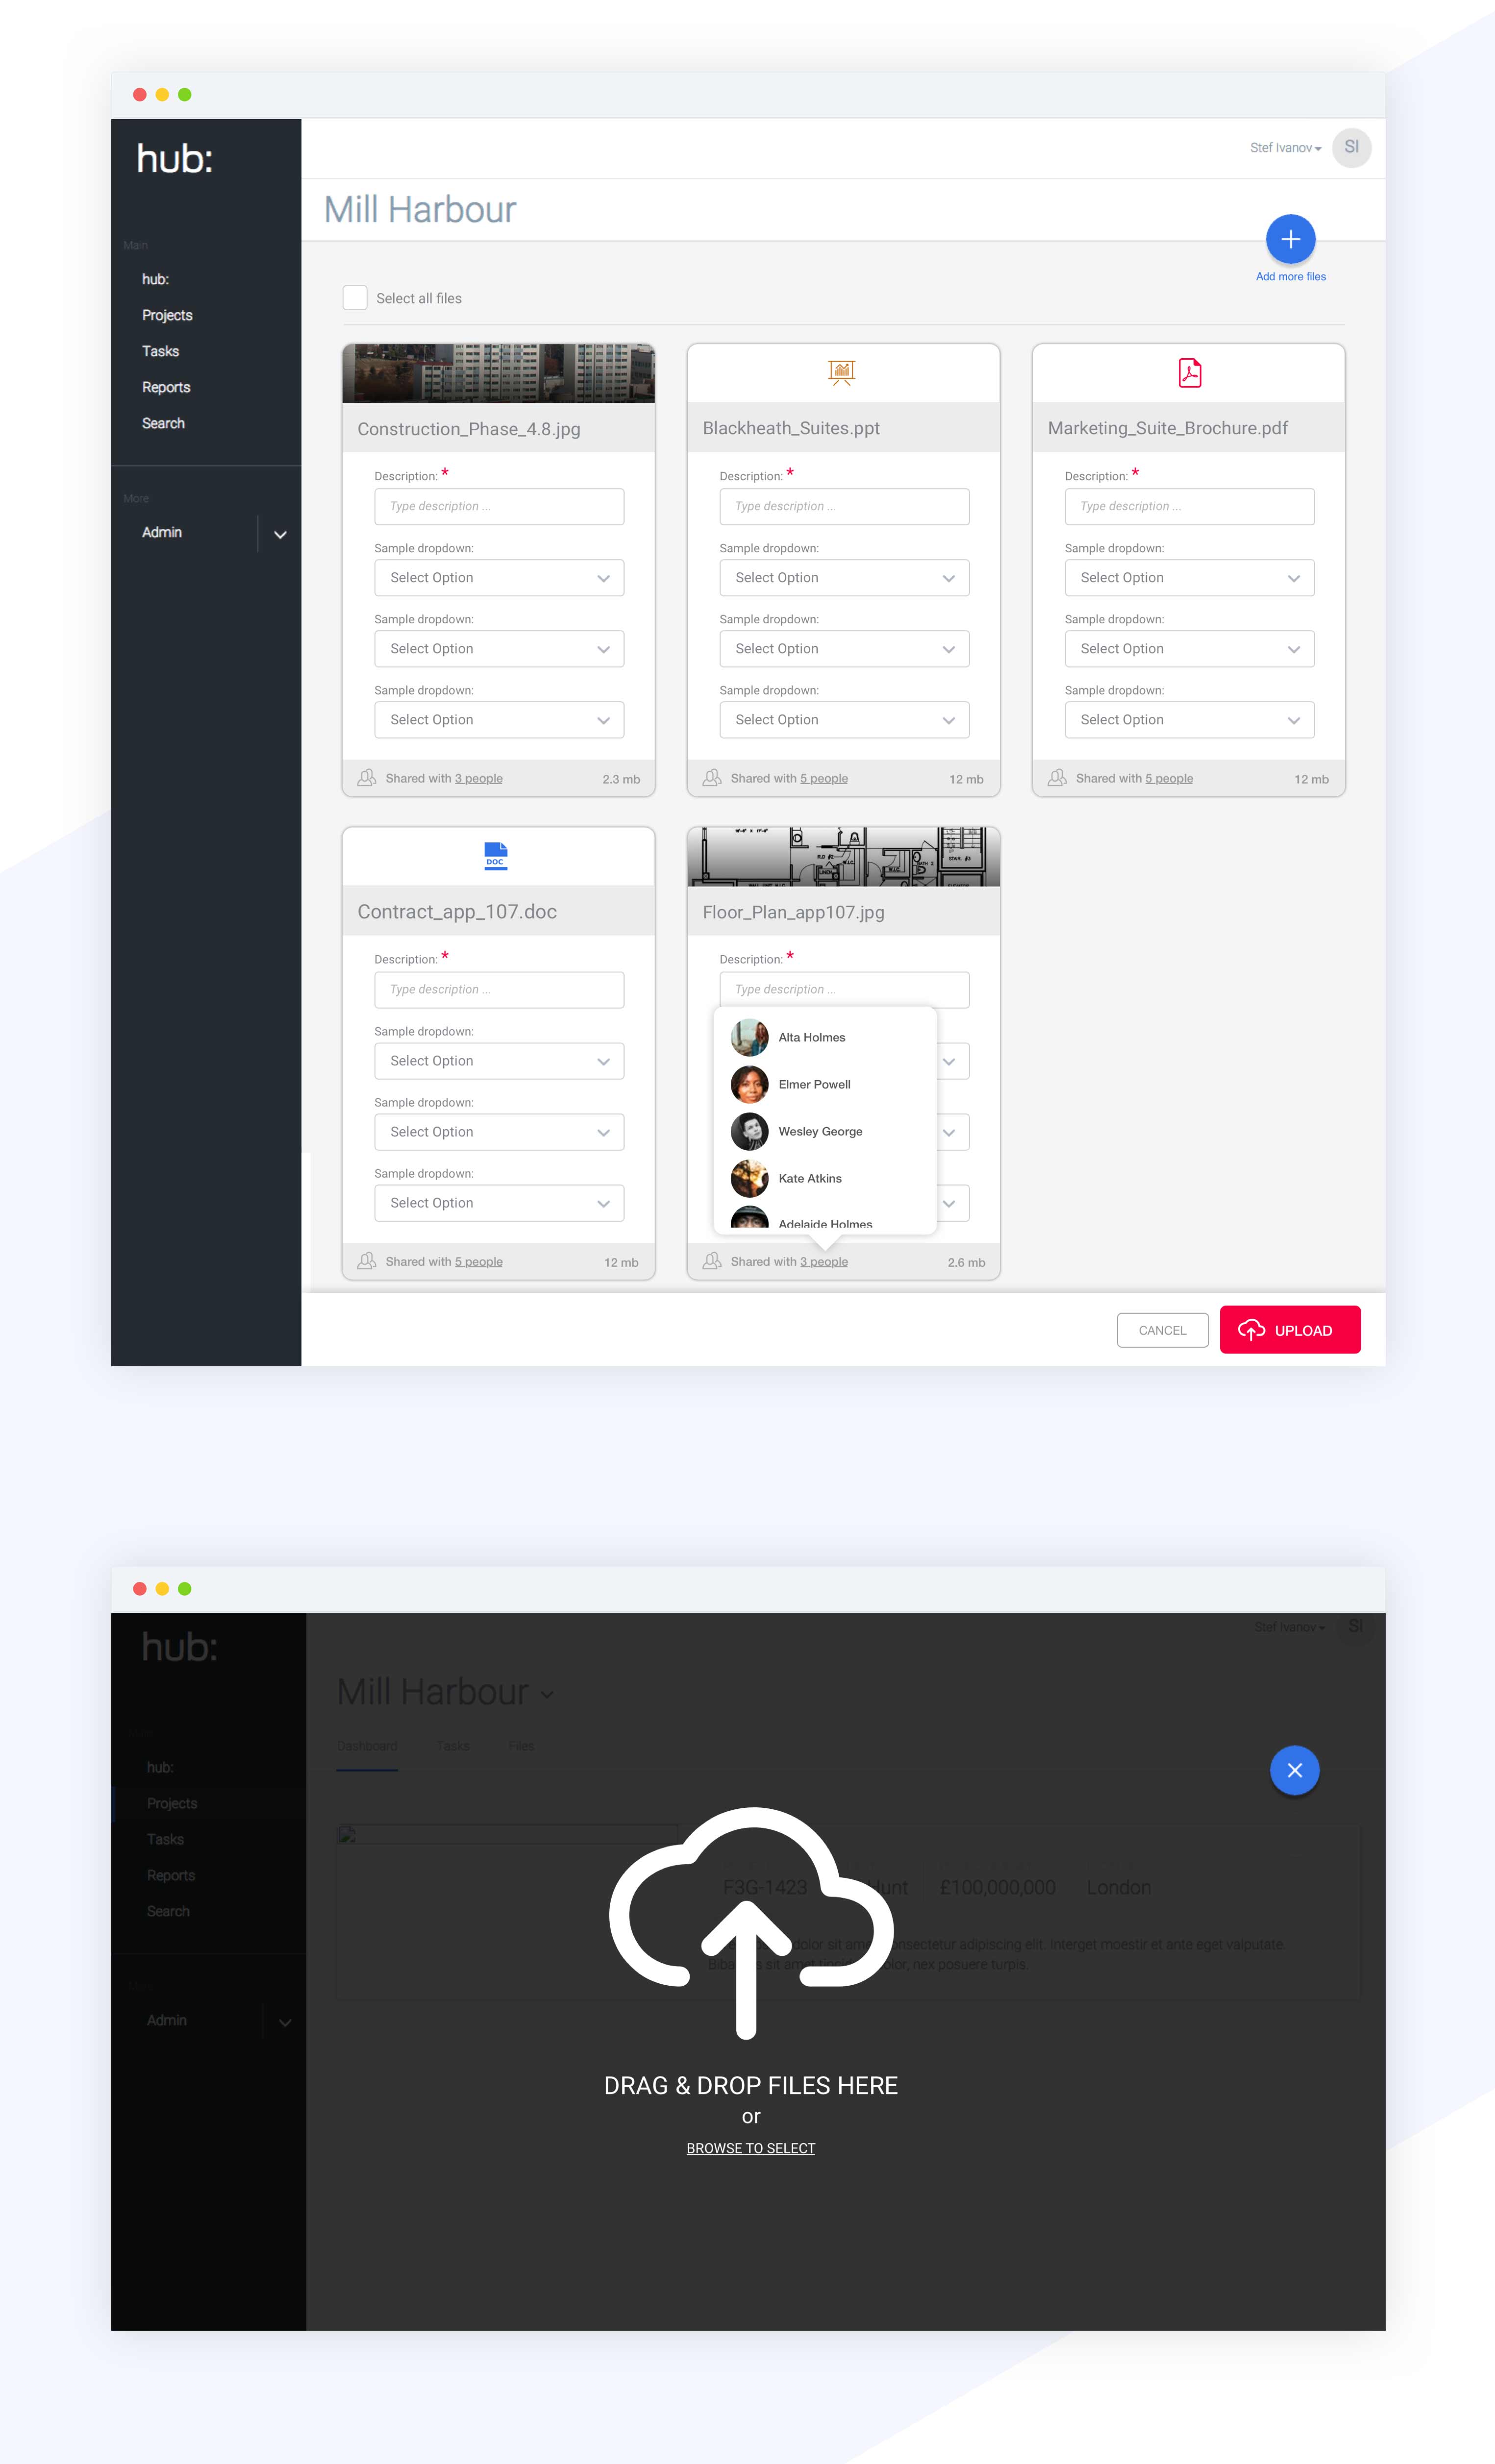 UI Mockups for dashboard and upload files